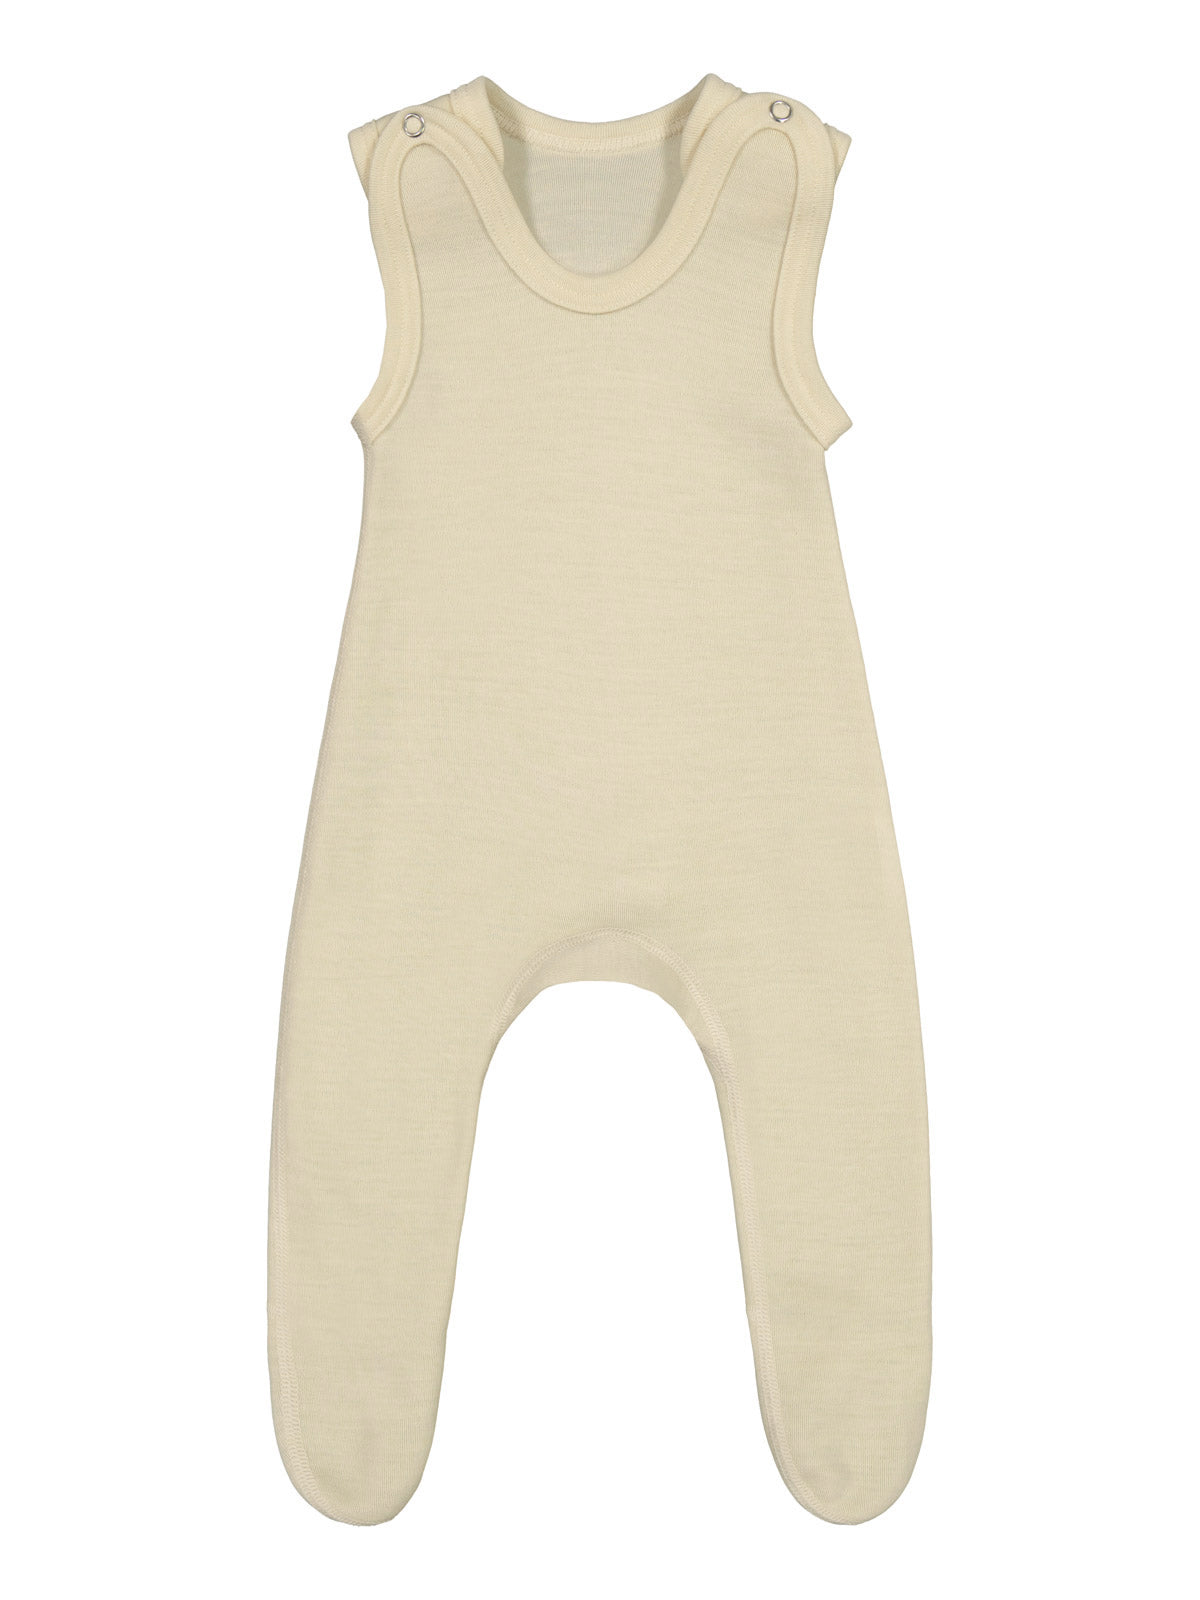 Romper Suit with Feet